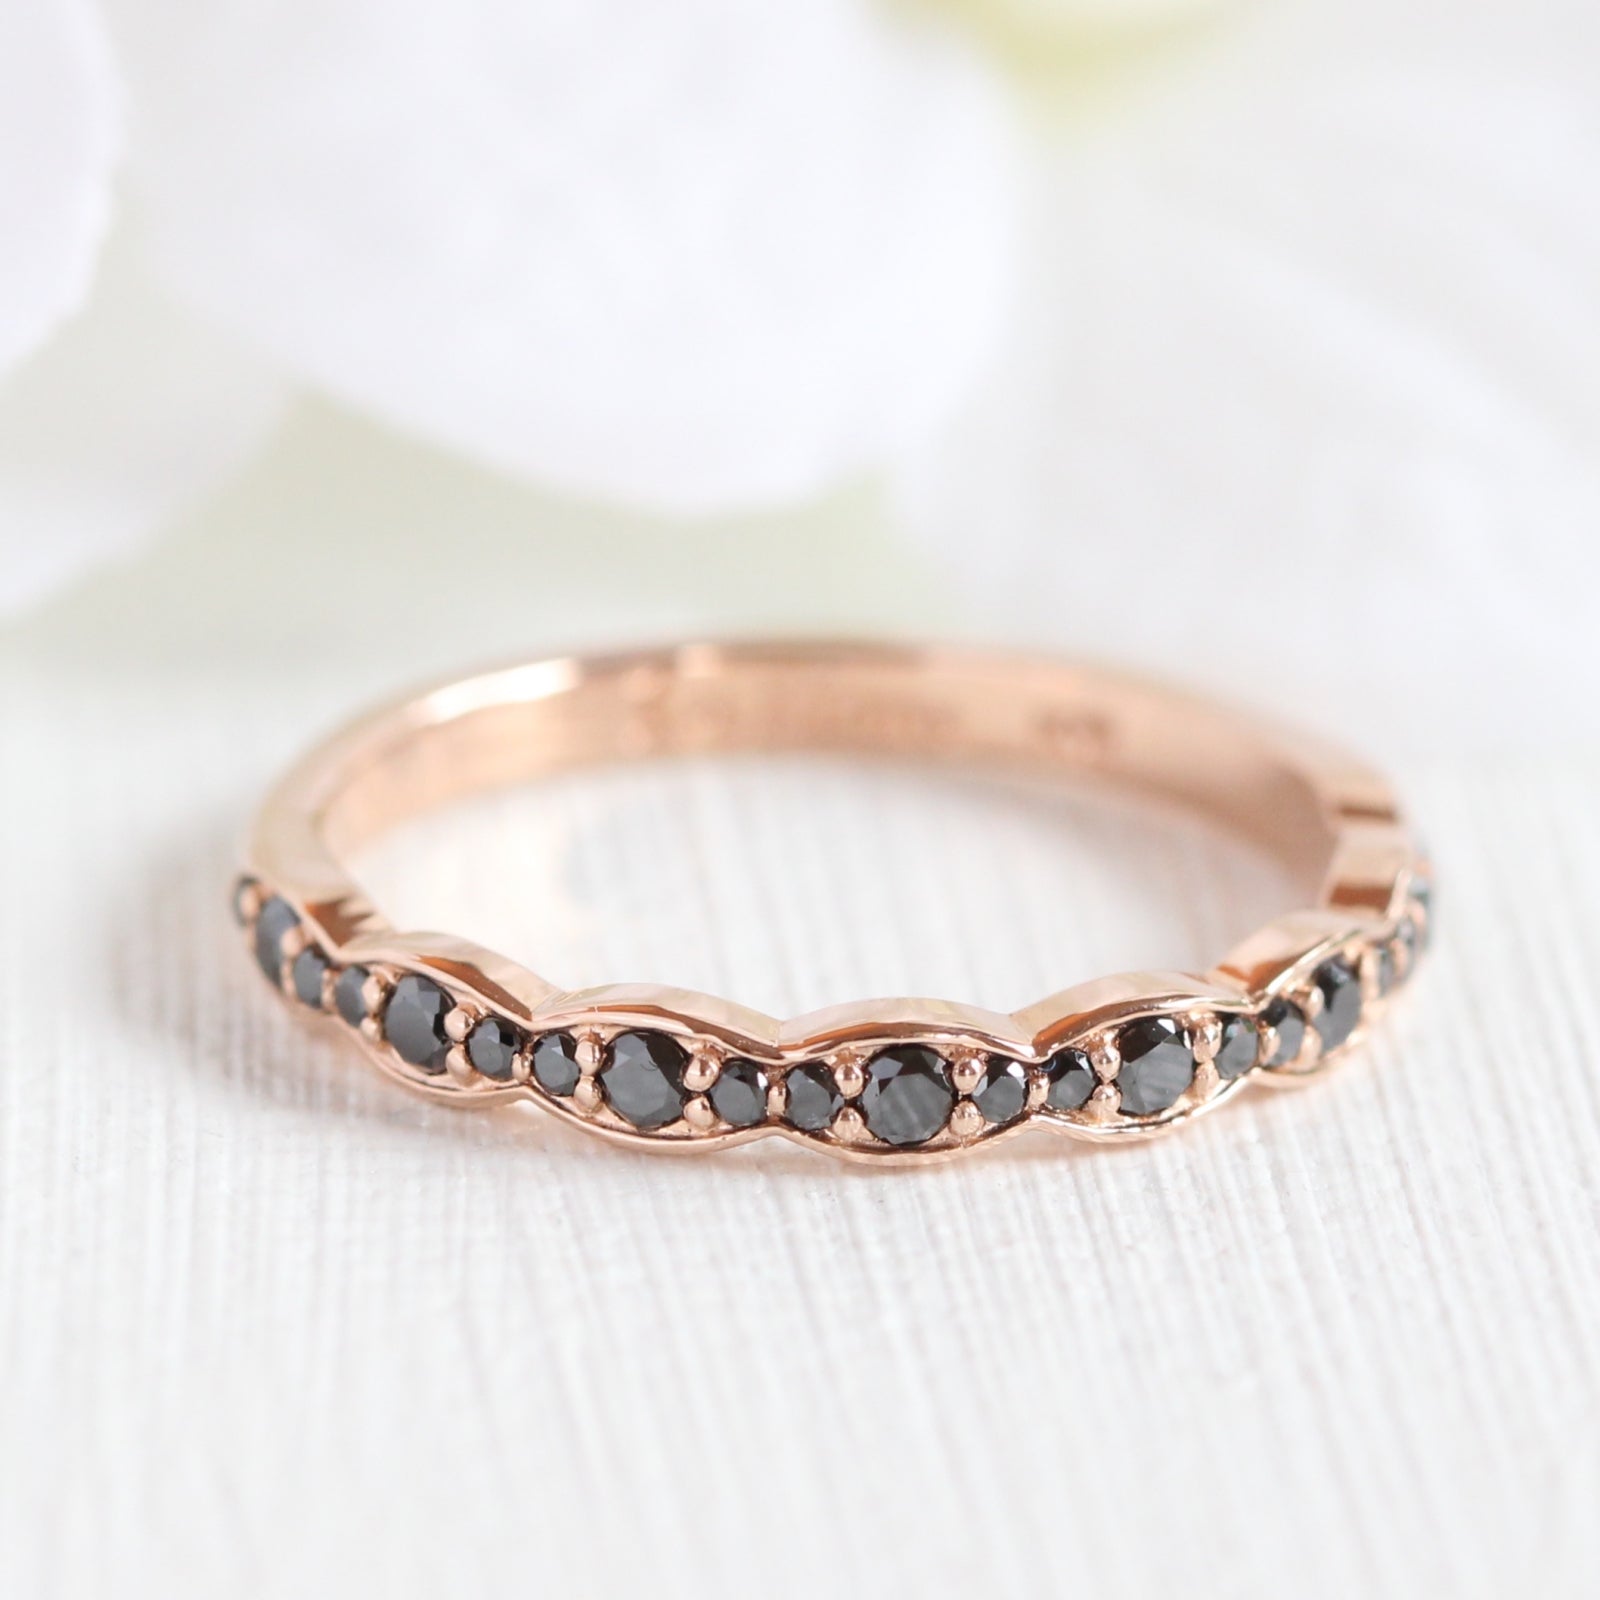 Black diamond wedding ring in rose gold scalloped band by la more design